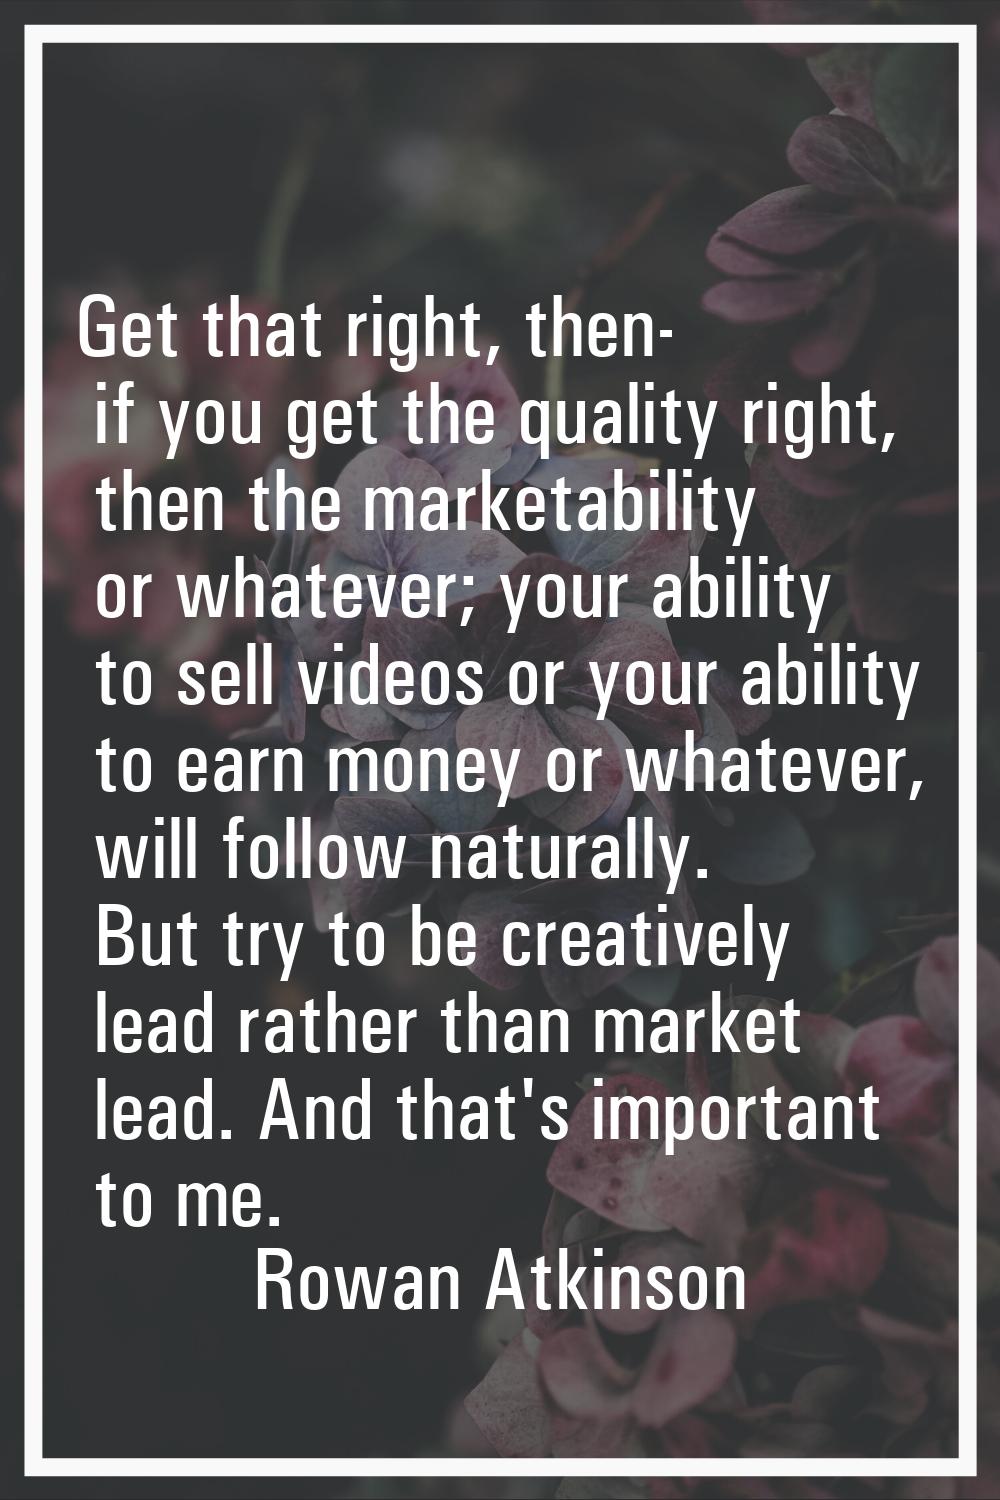 Get that right, then- if you get the quality right, then the marketability or whatever; your abilit